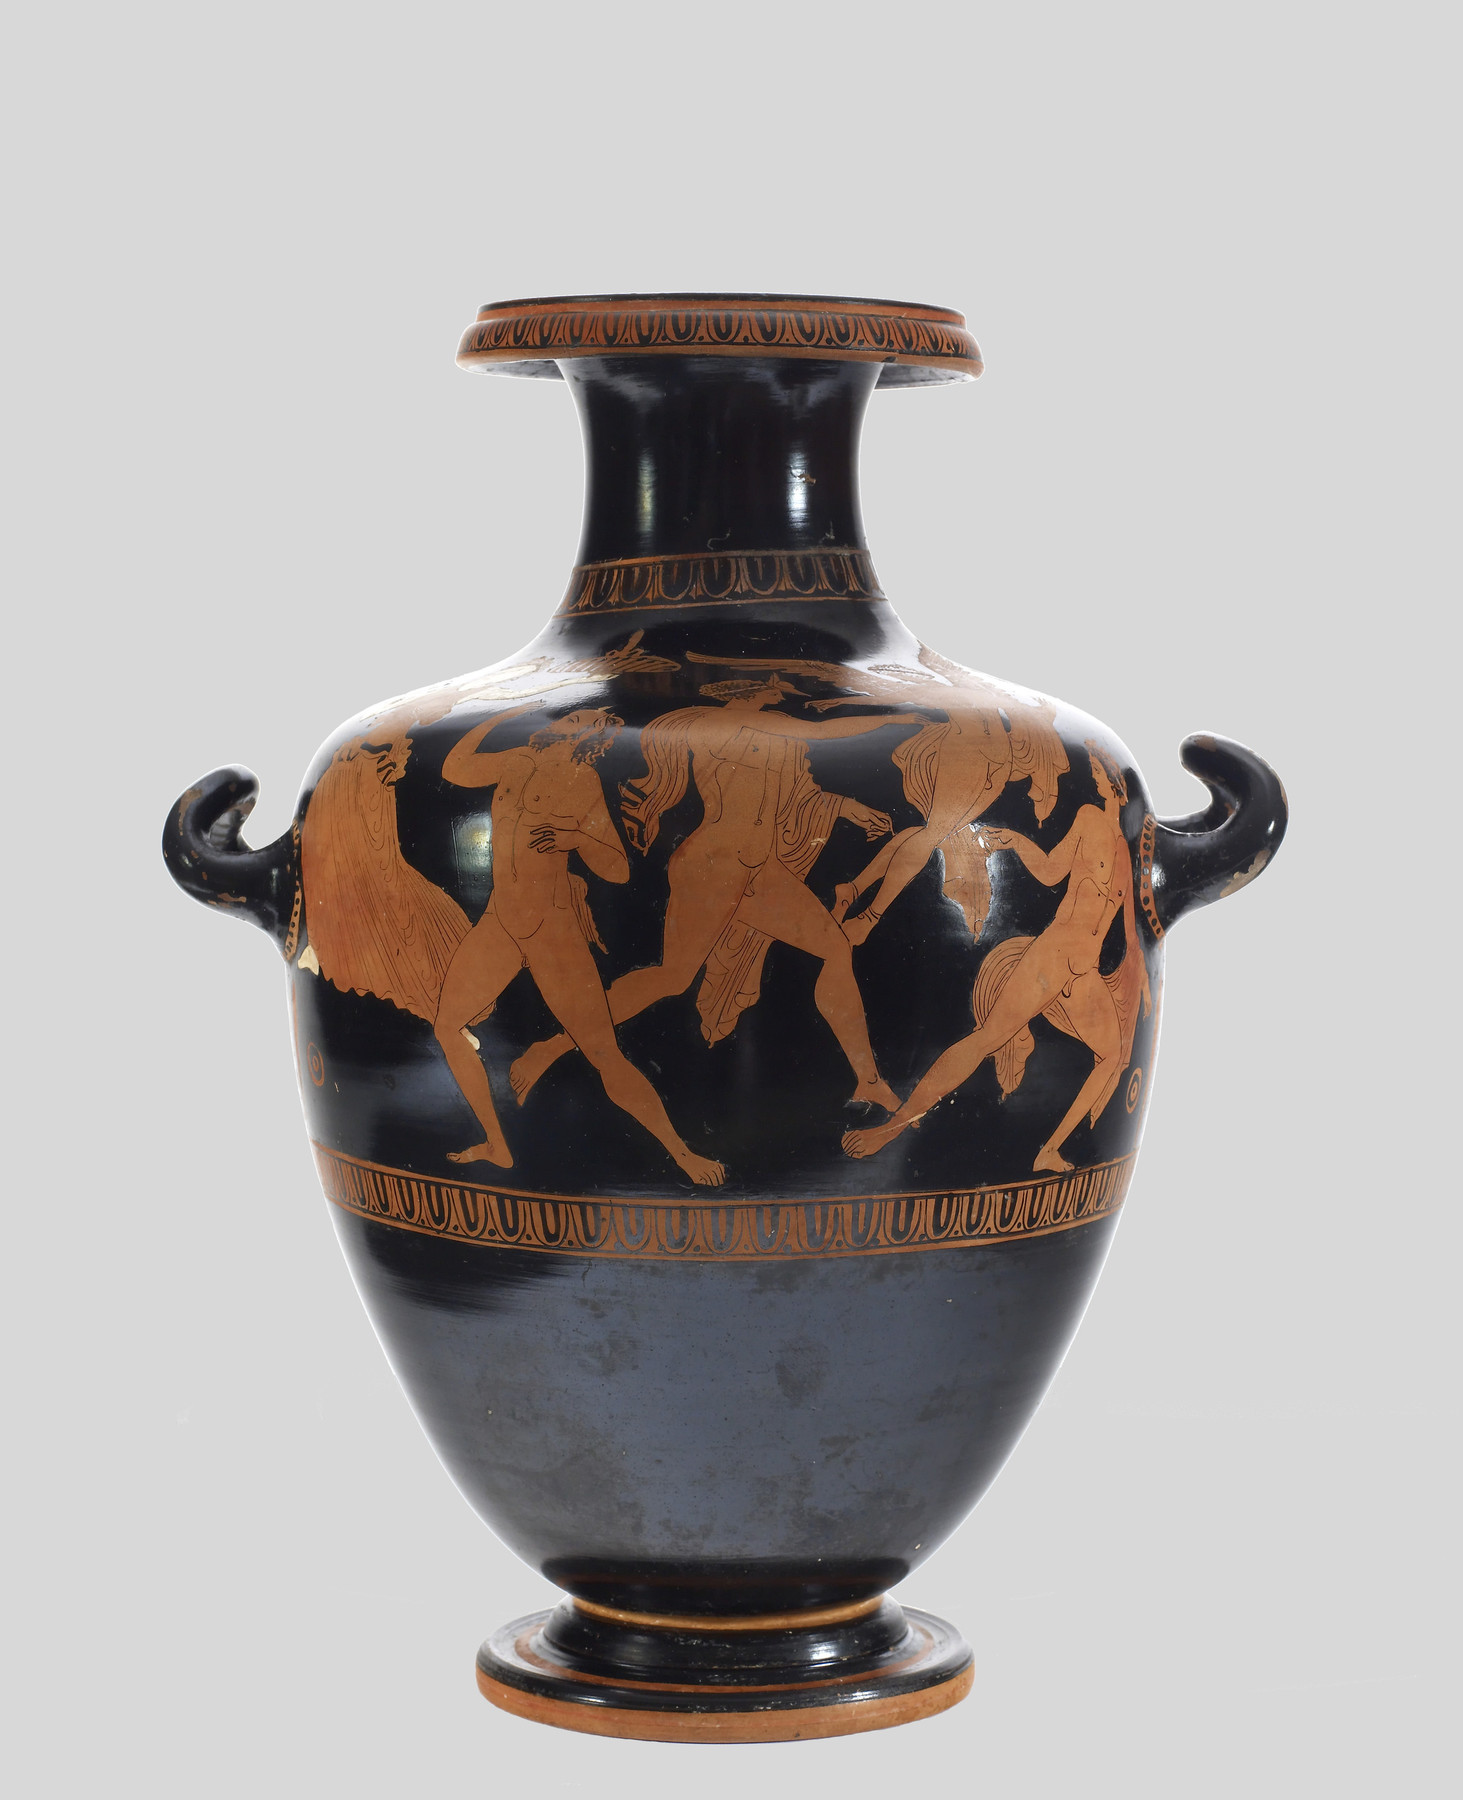 Image for Hydria with Hermes Pursuing a Youth